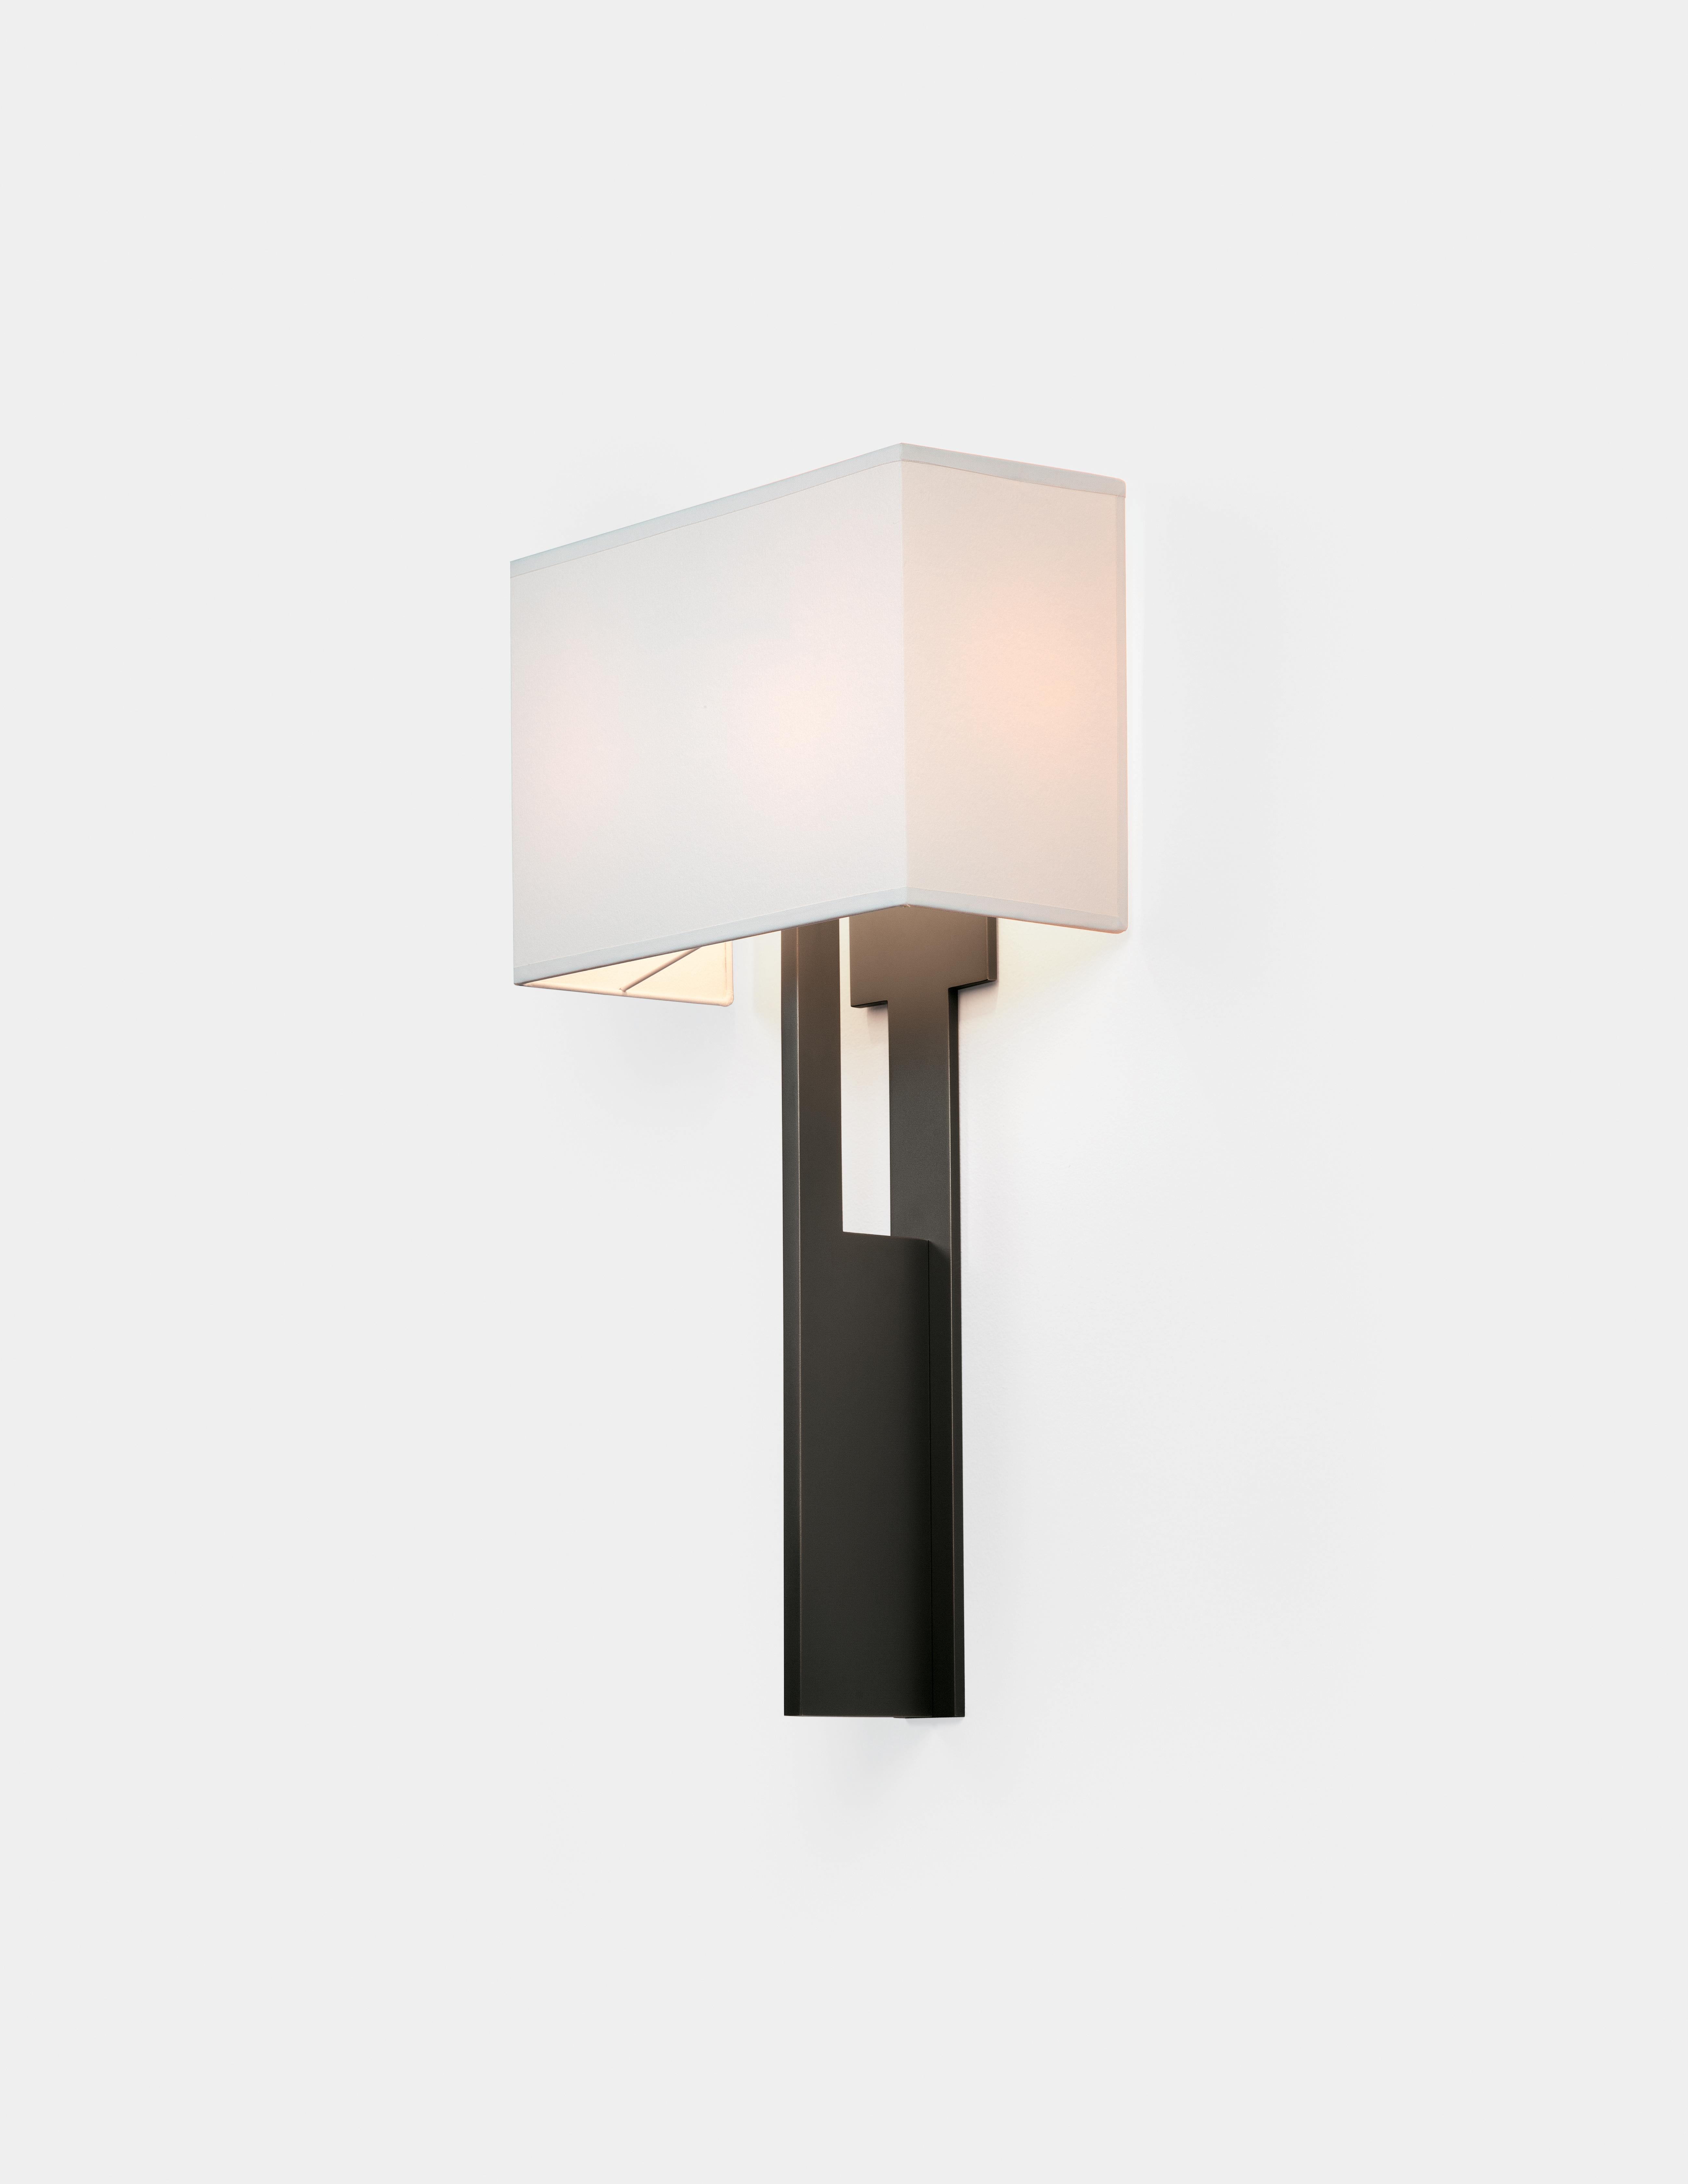 HOLLY HUNT Blade small wall sconce in metal frame and aquarelle shade. An architectural sconce with a versatile aesthetic at home with a variety of interior styles. Featuring expert proportions and a quiet presence.


Additional